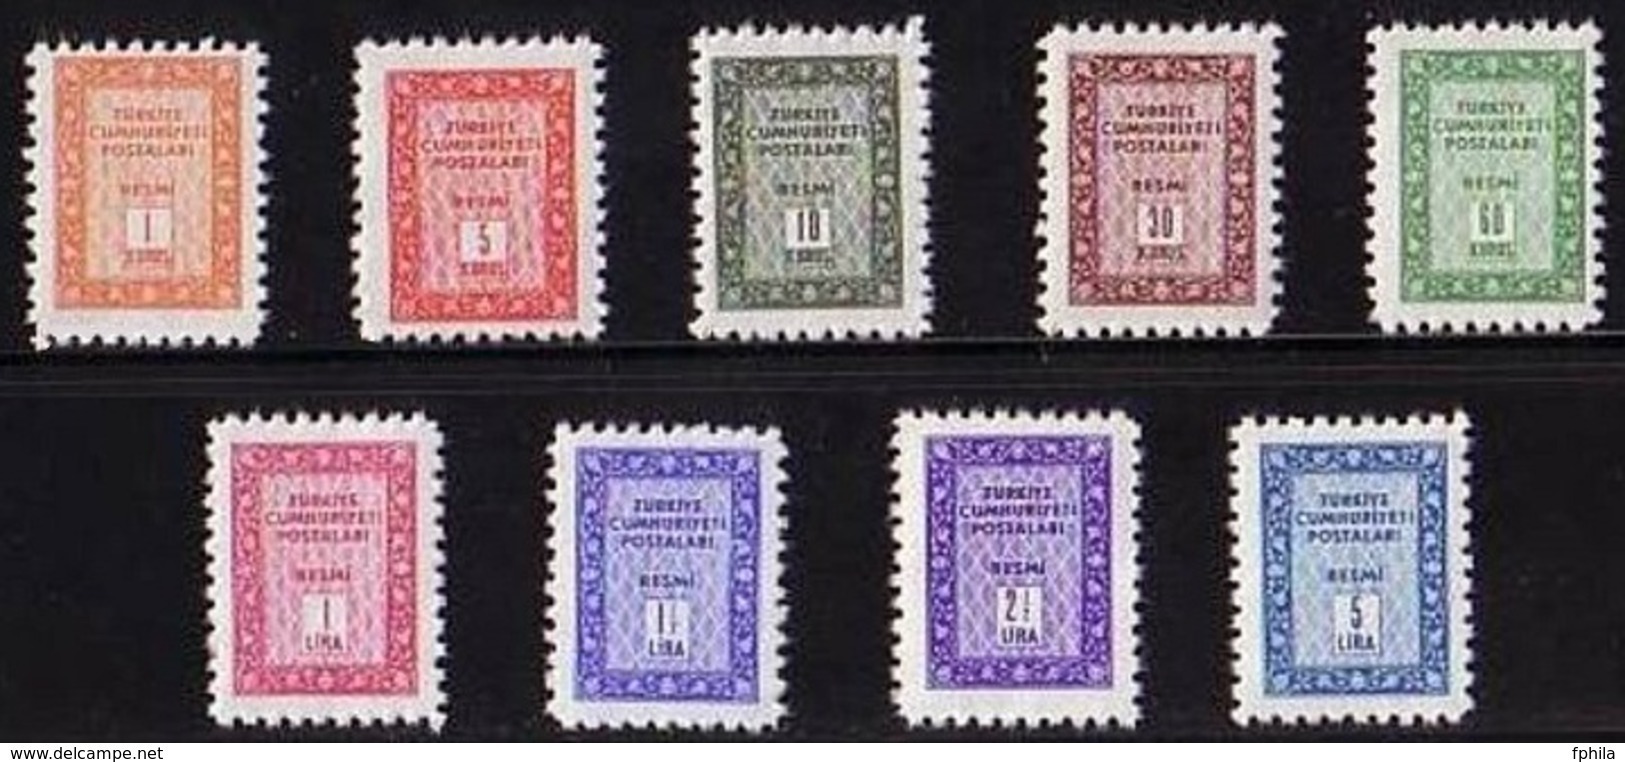 1960 TURKEY OFFICIAL STAMPS MNH ** - Timbres De Service